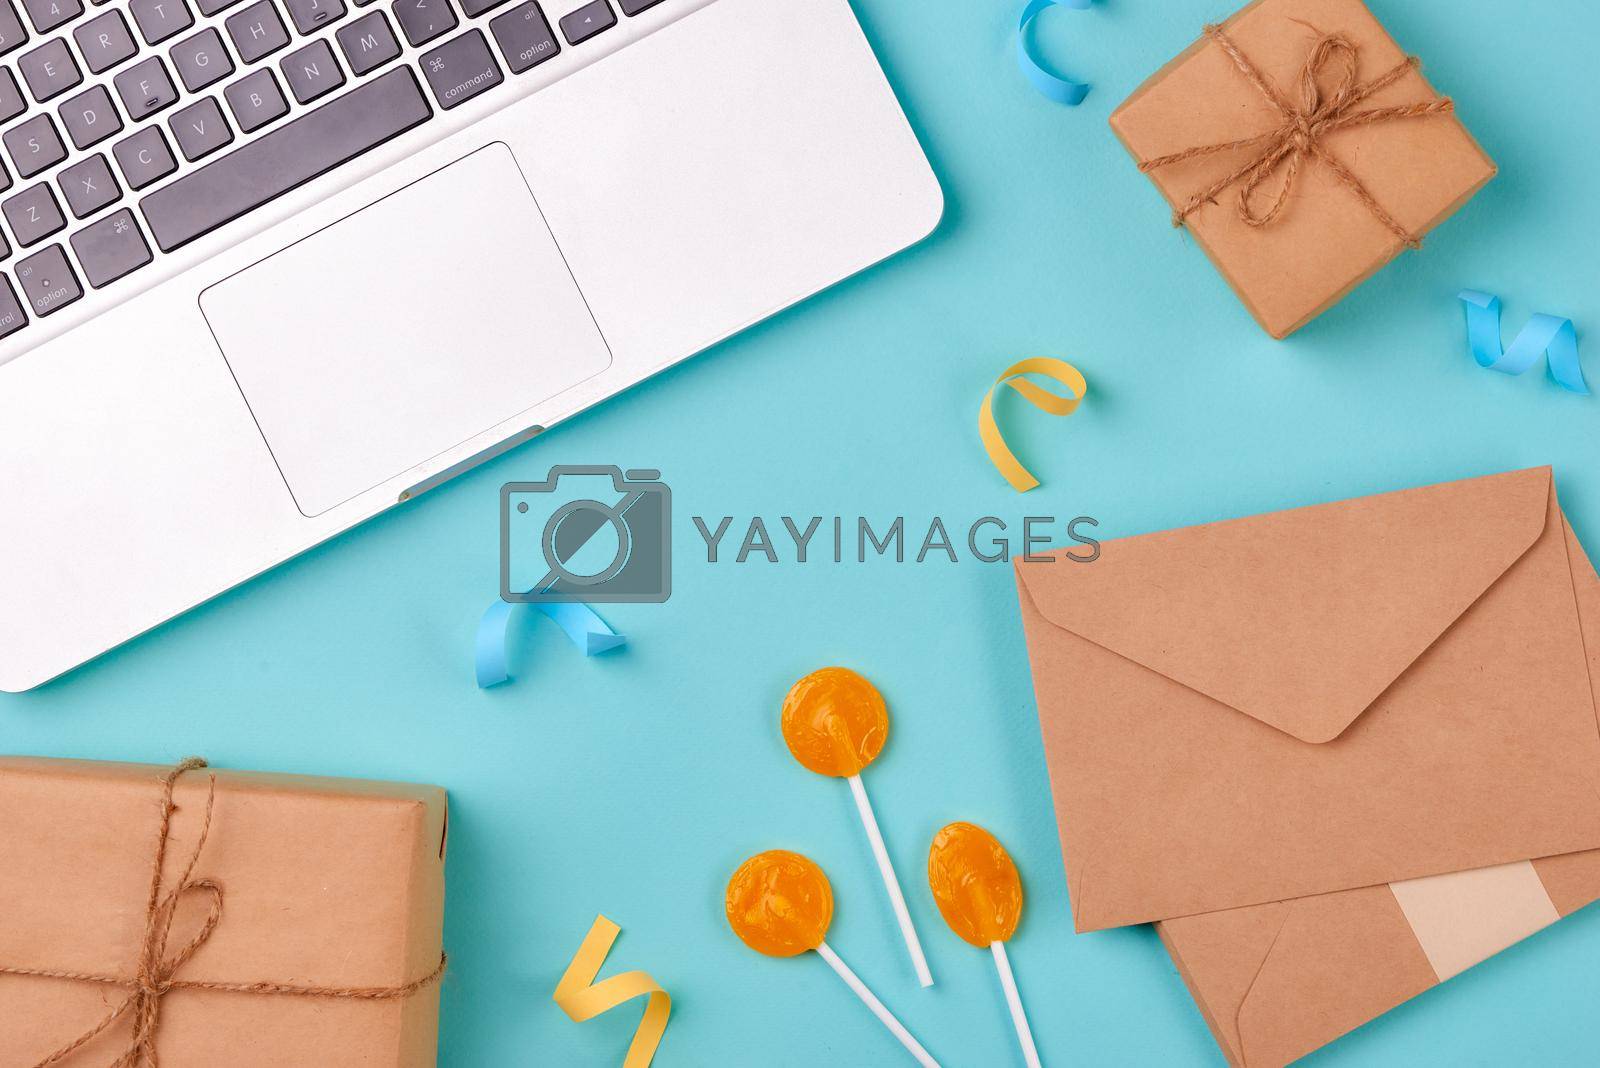 Celebration envelope, birthday party things and laptop on a yellow background